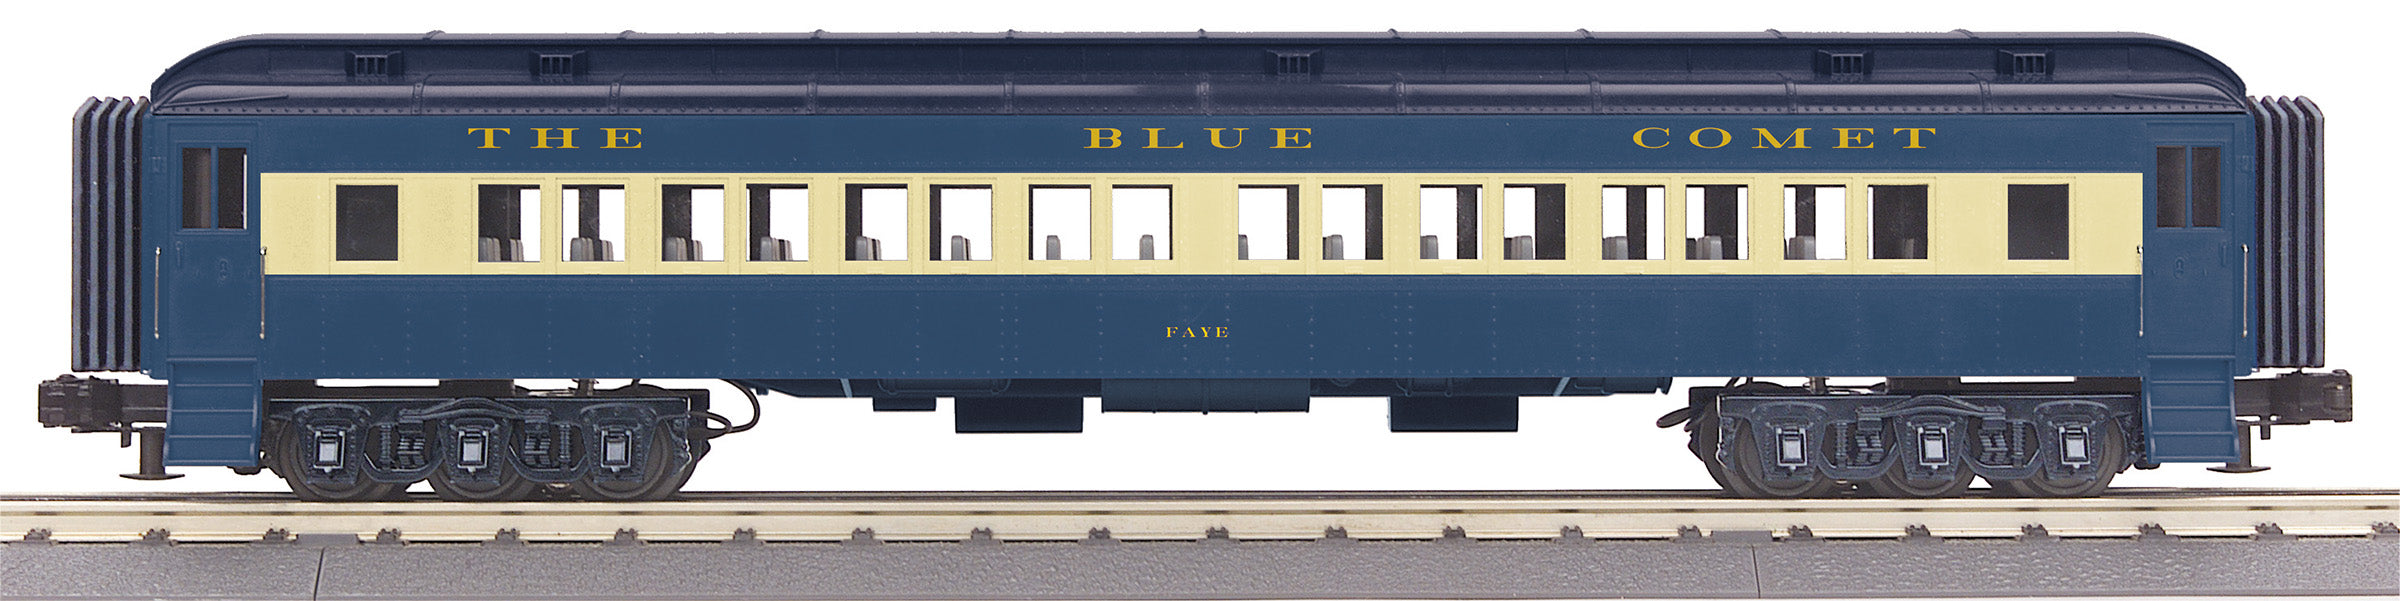 MTH 30-69365 - 60' Madison Coach Car "Jersey Central (Blue Comet"